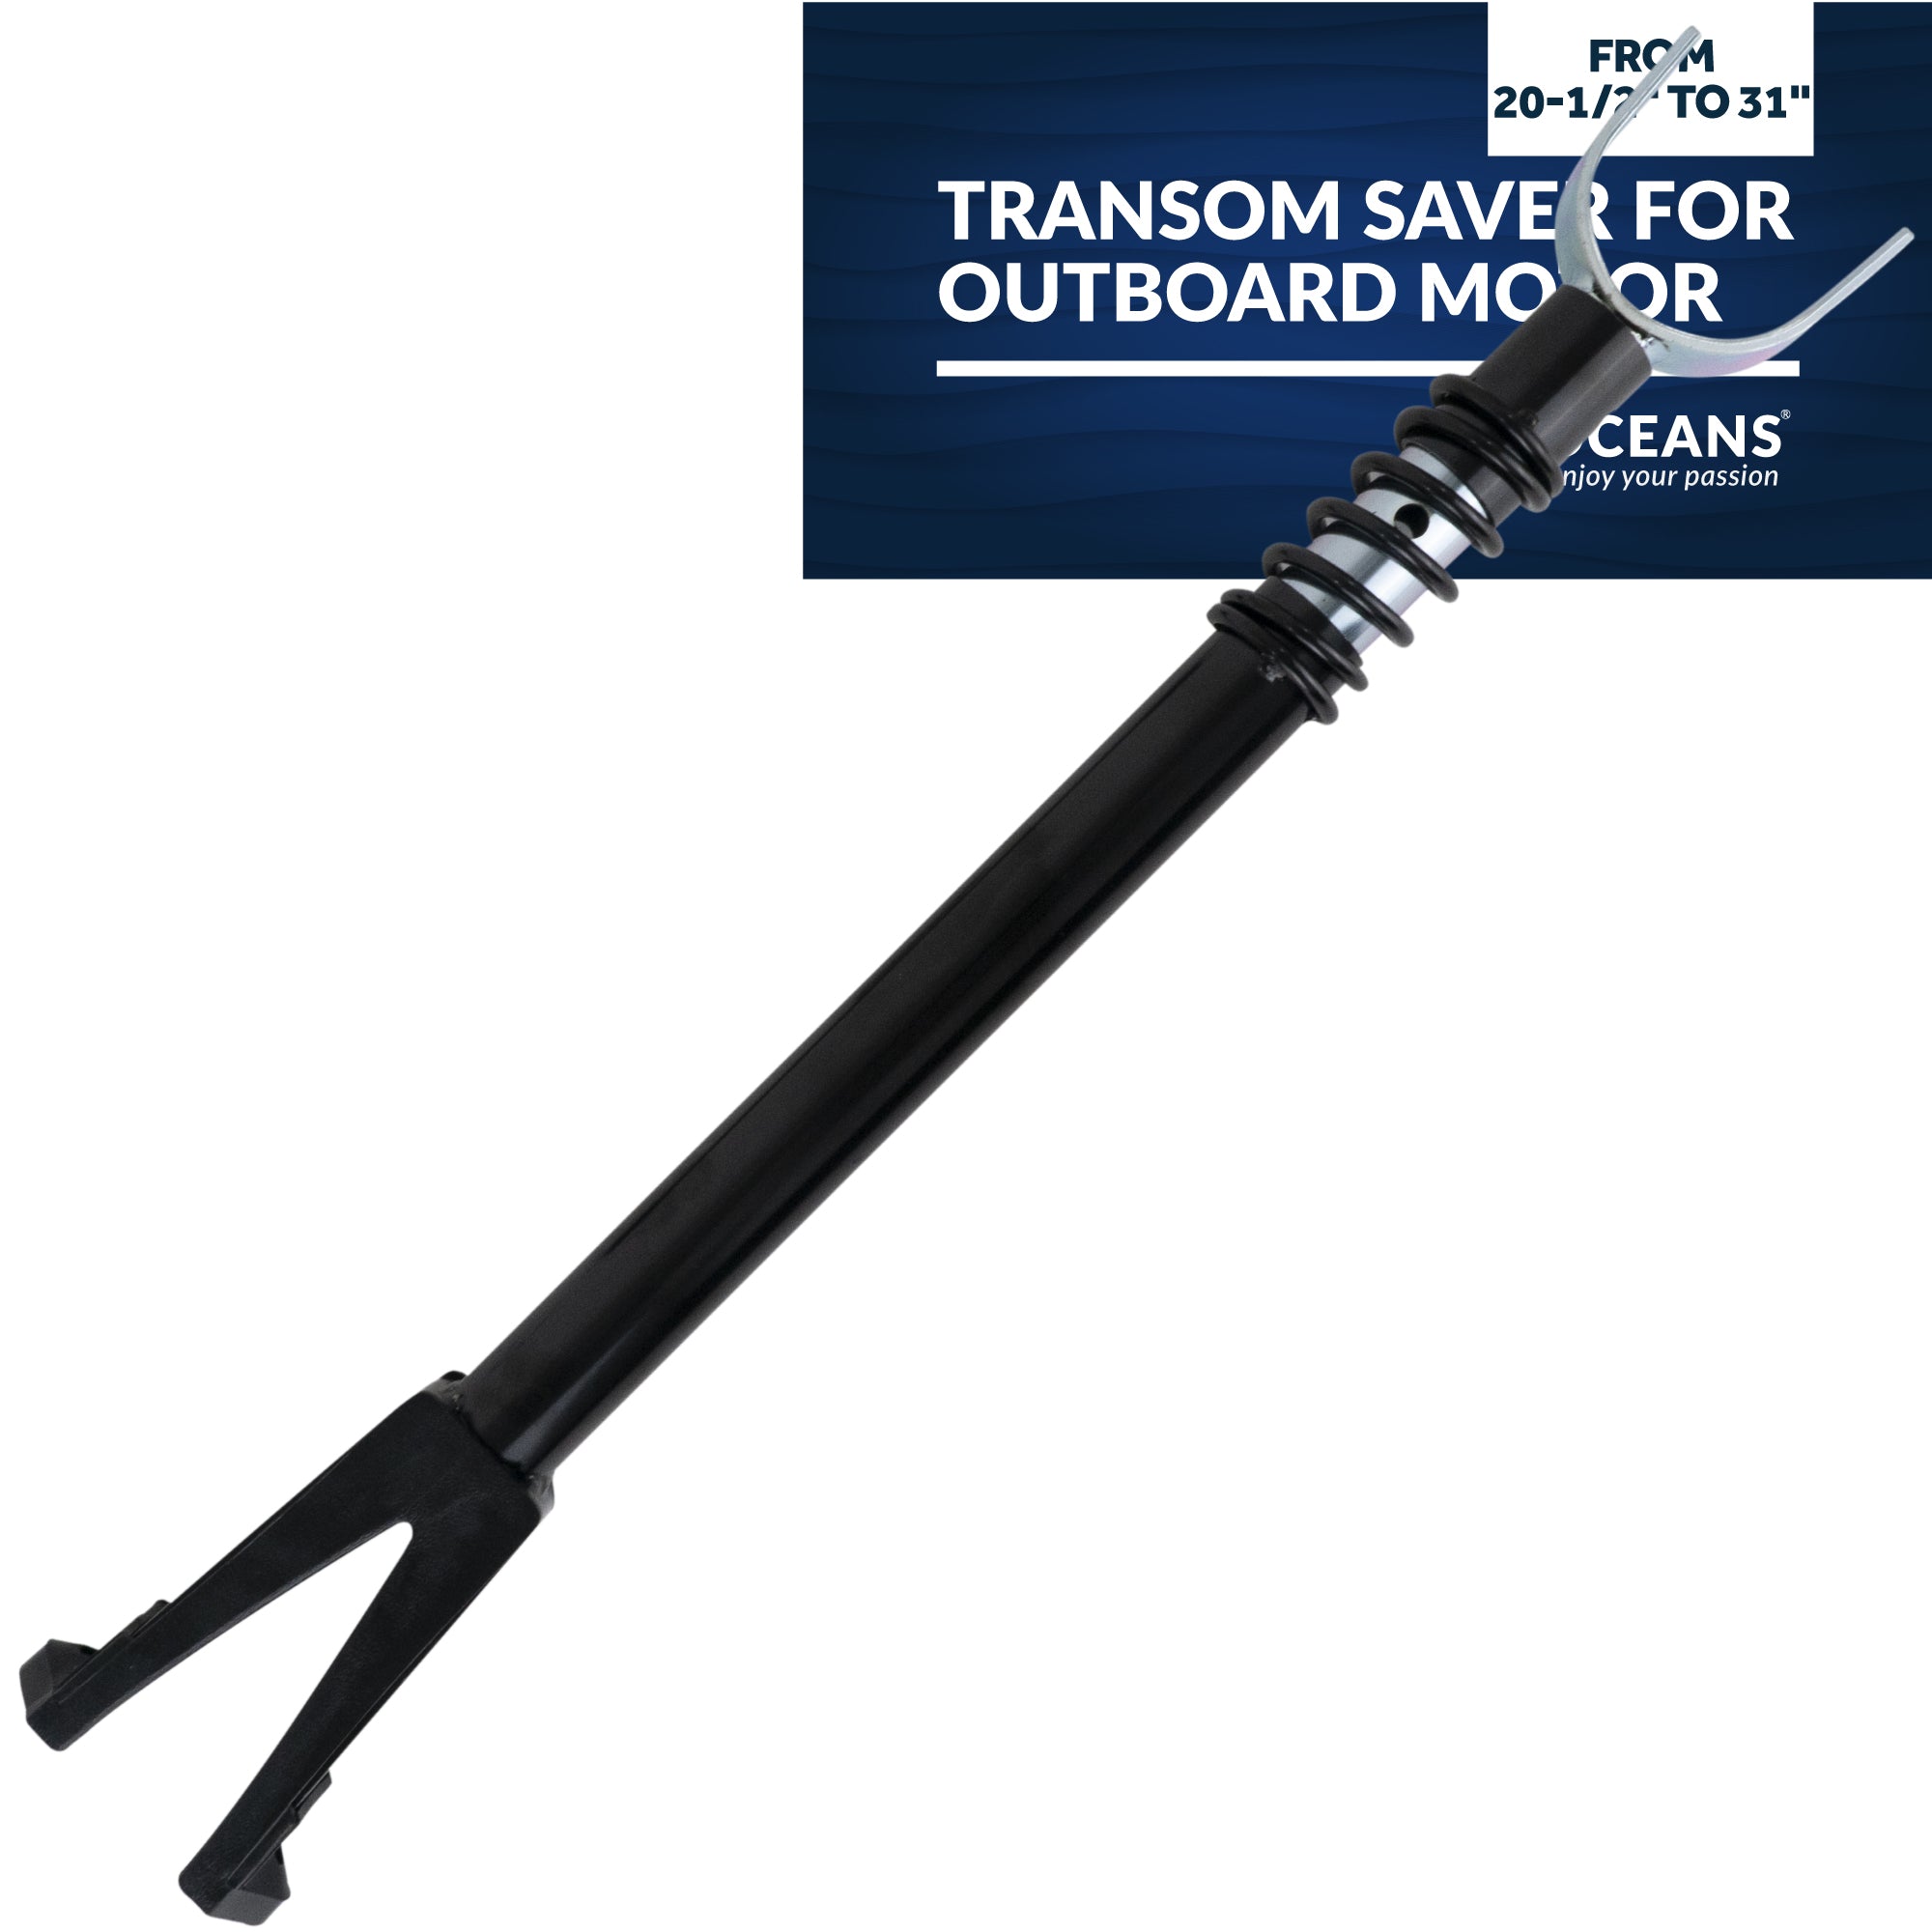 Transom Saver for Outboard Motor, Adjustable from 20-1/2" to 31" - FO3465